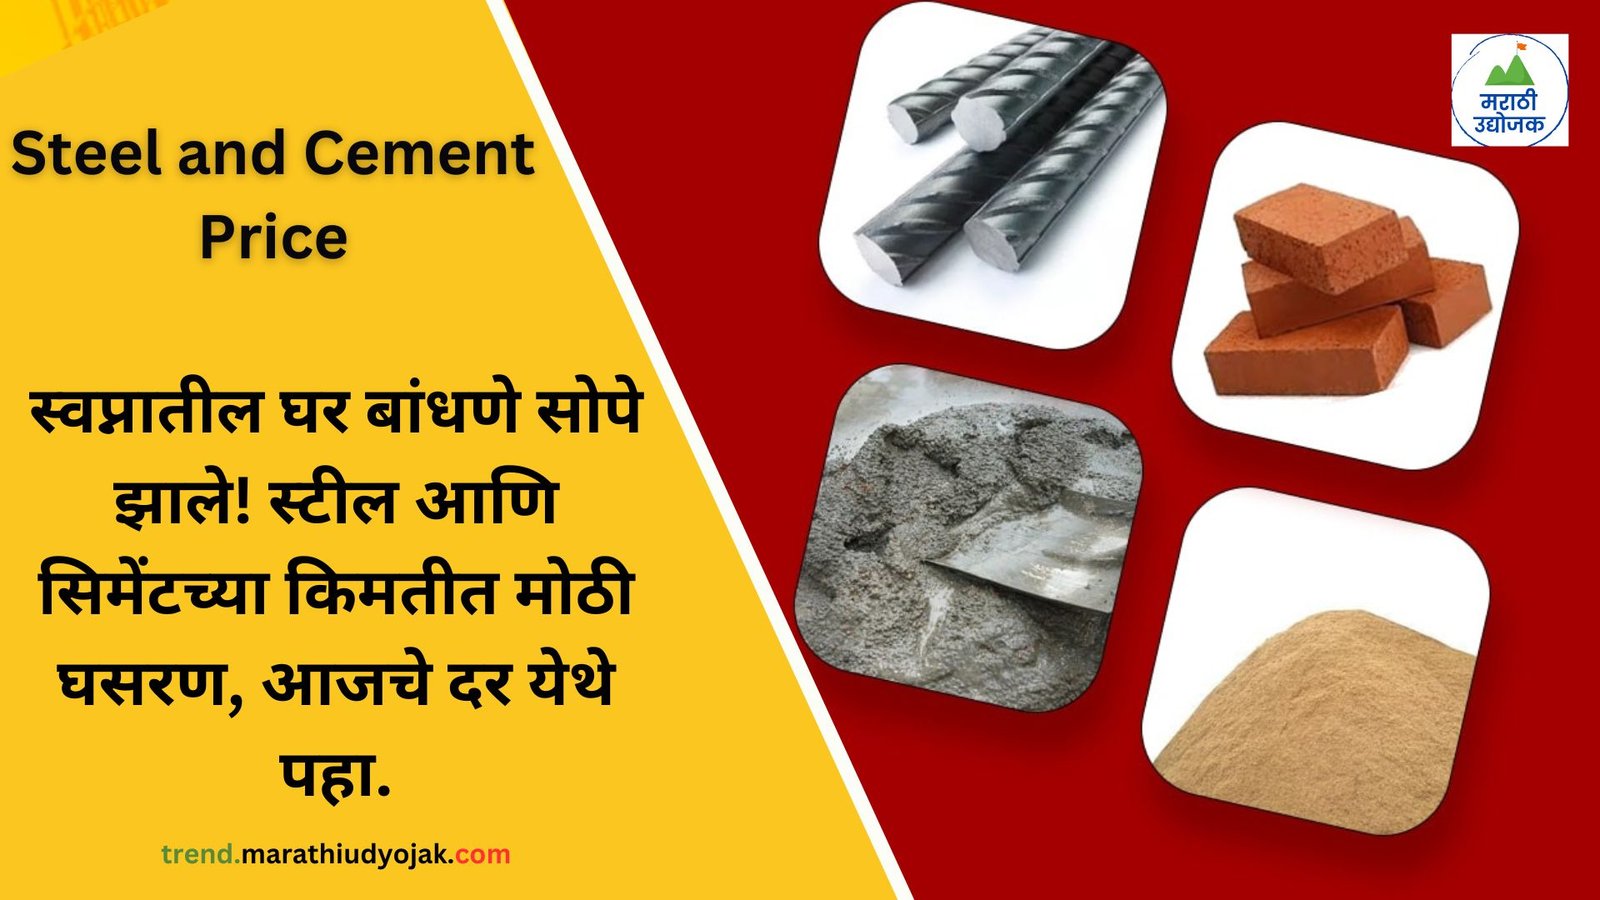 Latest News on Steel & Cement Prices